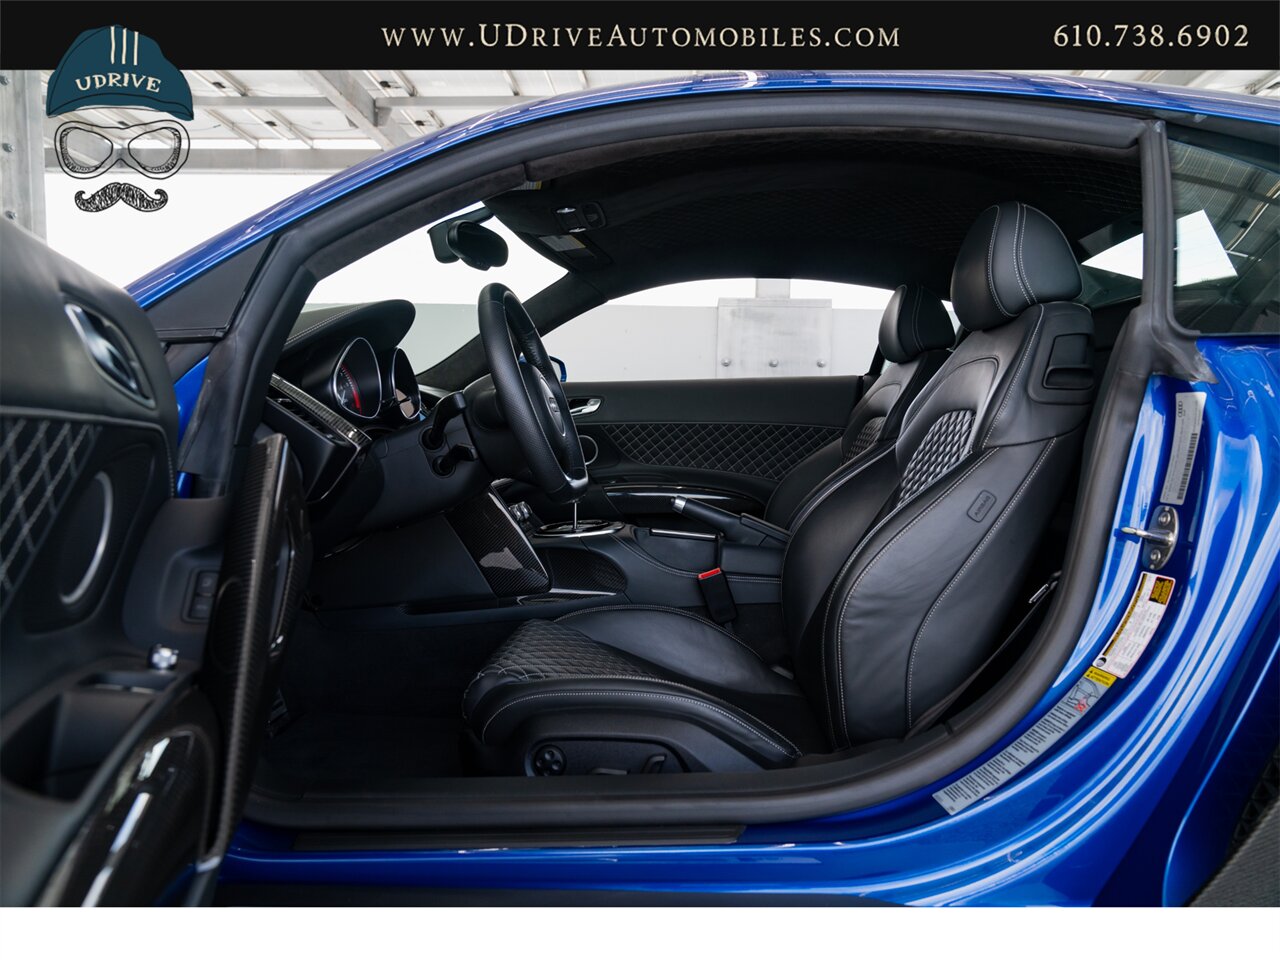 2015 Audi R8 5.2 V10 Quattro 6 Speed Manual 10k Miles  Diamond Stitched Leather 1 of 2 - Photo 29 - West Chester, PA 19382